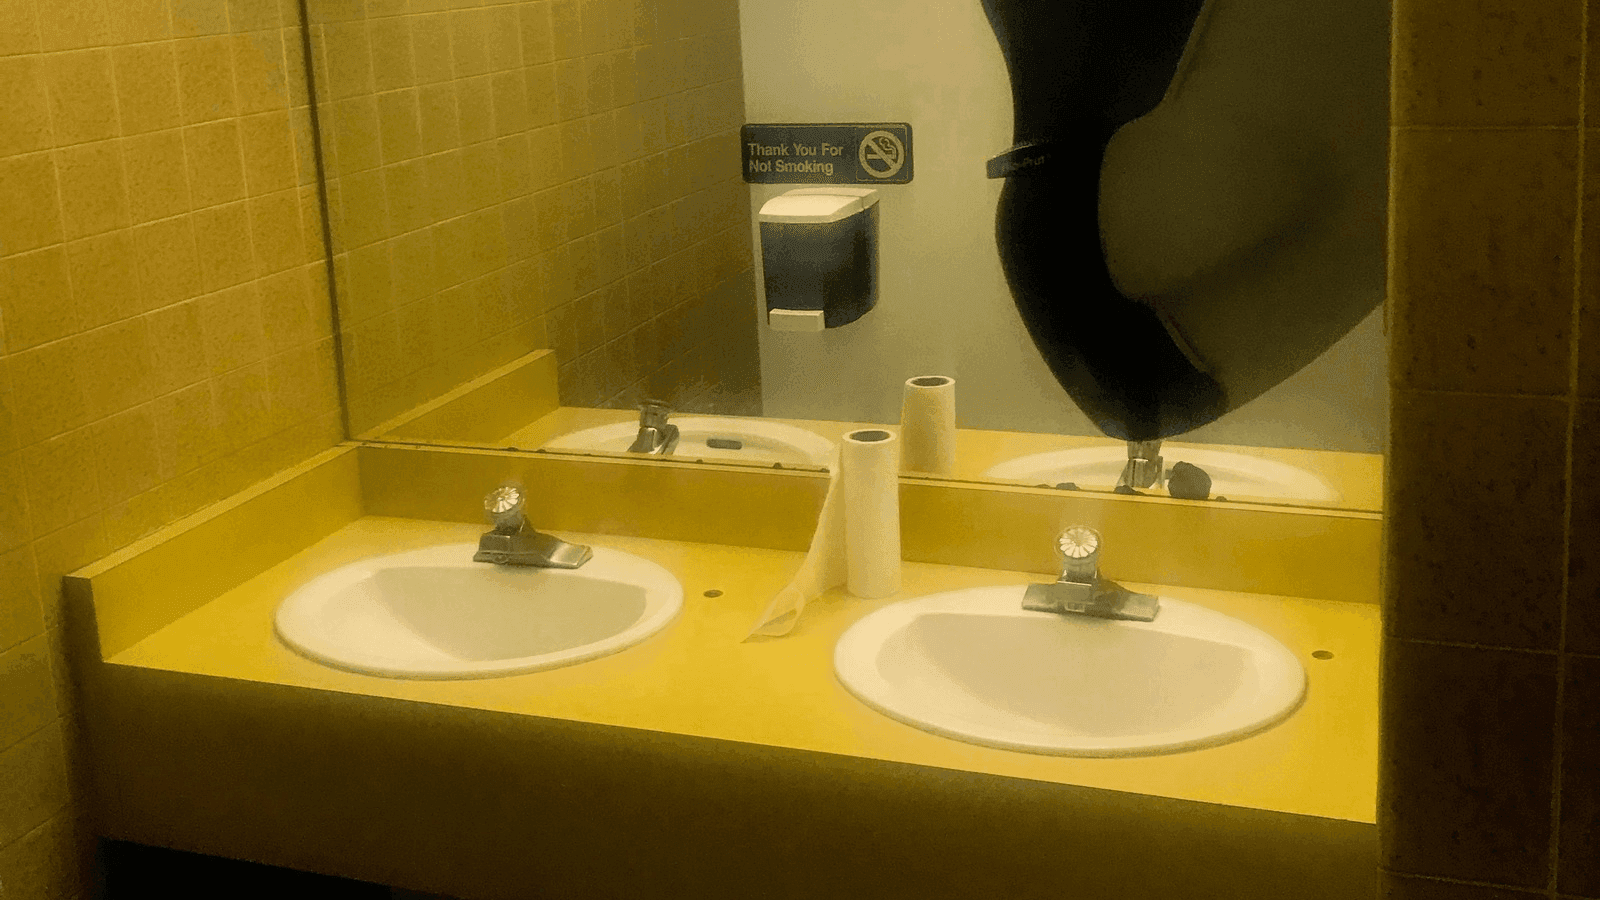 sinks where migrant children allegedly bathed in Phoenix